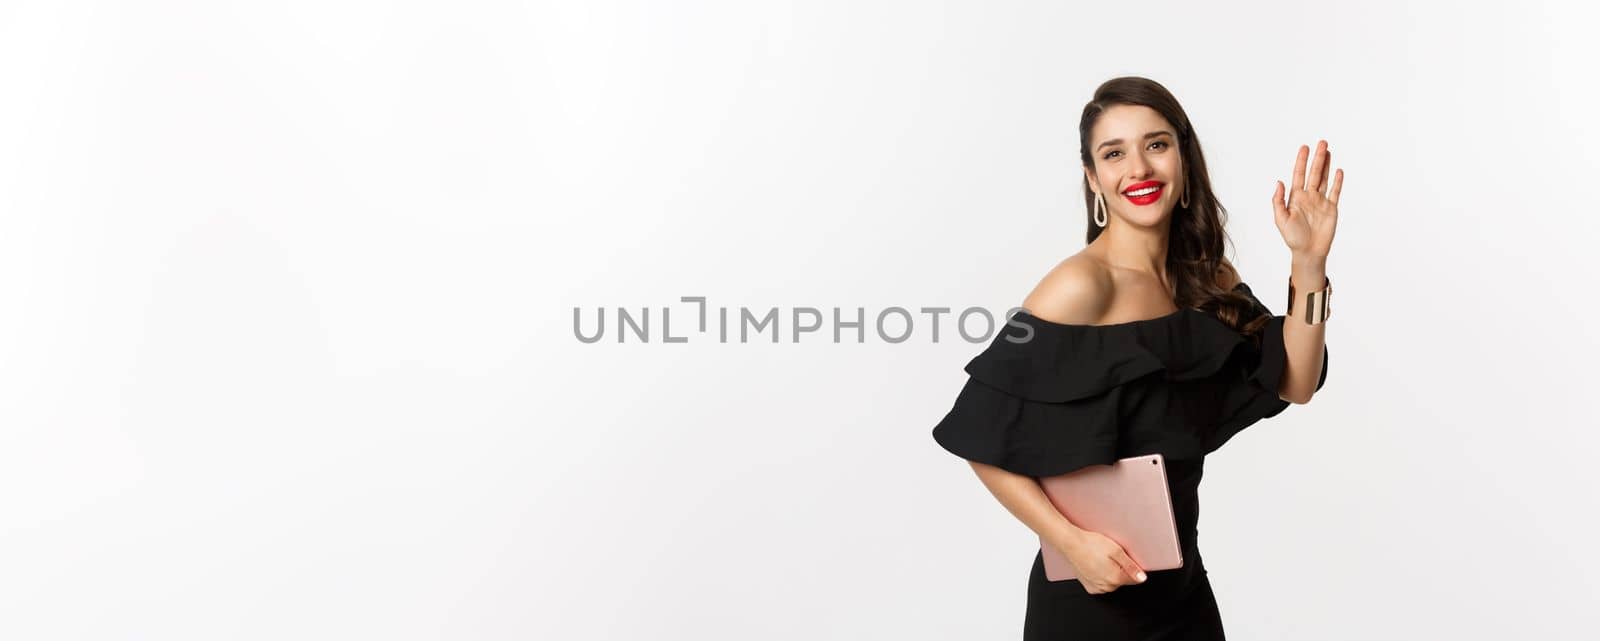 Fashion and shopping concept. Stylish young woman with glamour makeup, wearing black dress, holding digital tablet and saying hi, waving hand to greet you, white background.